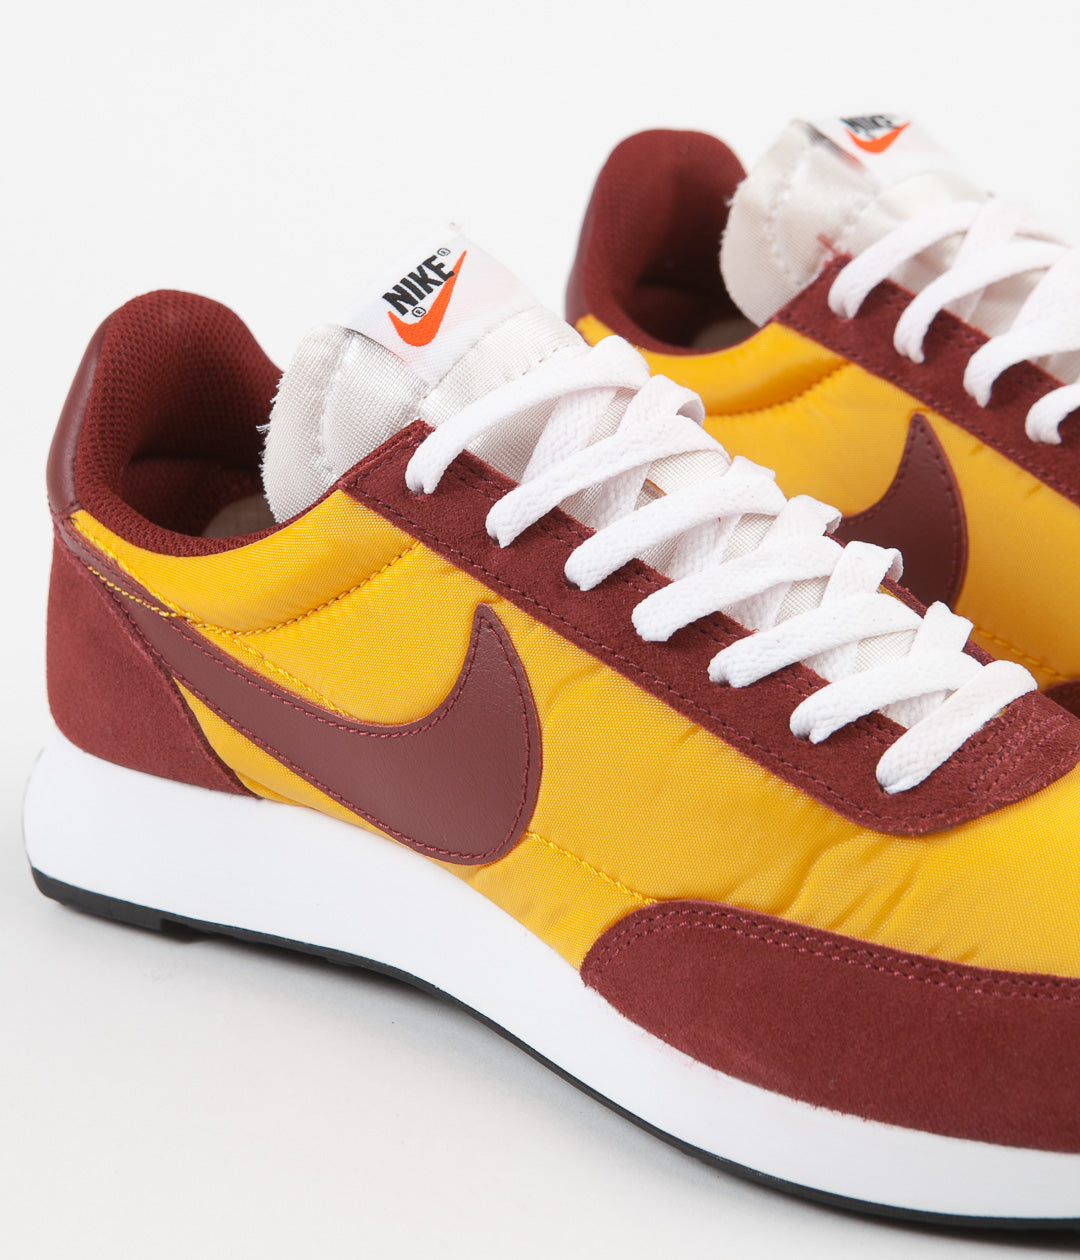 Nike Air Tailwind 79 Shoes - University Gold / Team Red - White - Blac ...